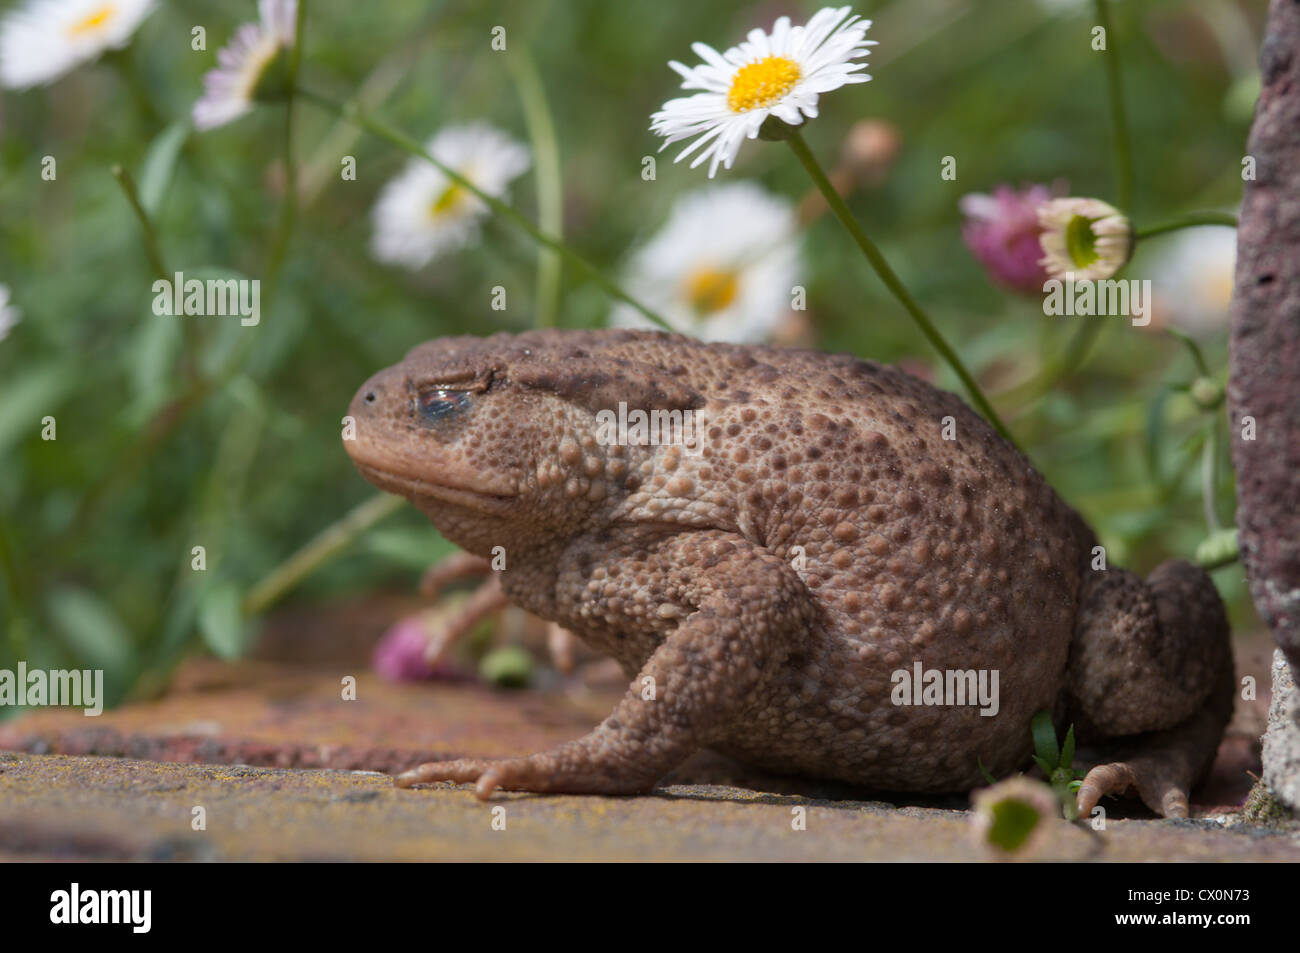 Common toad (Bufo bufo) in a garden West Sussex, England, UK. July. Stock Photo